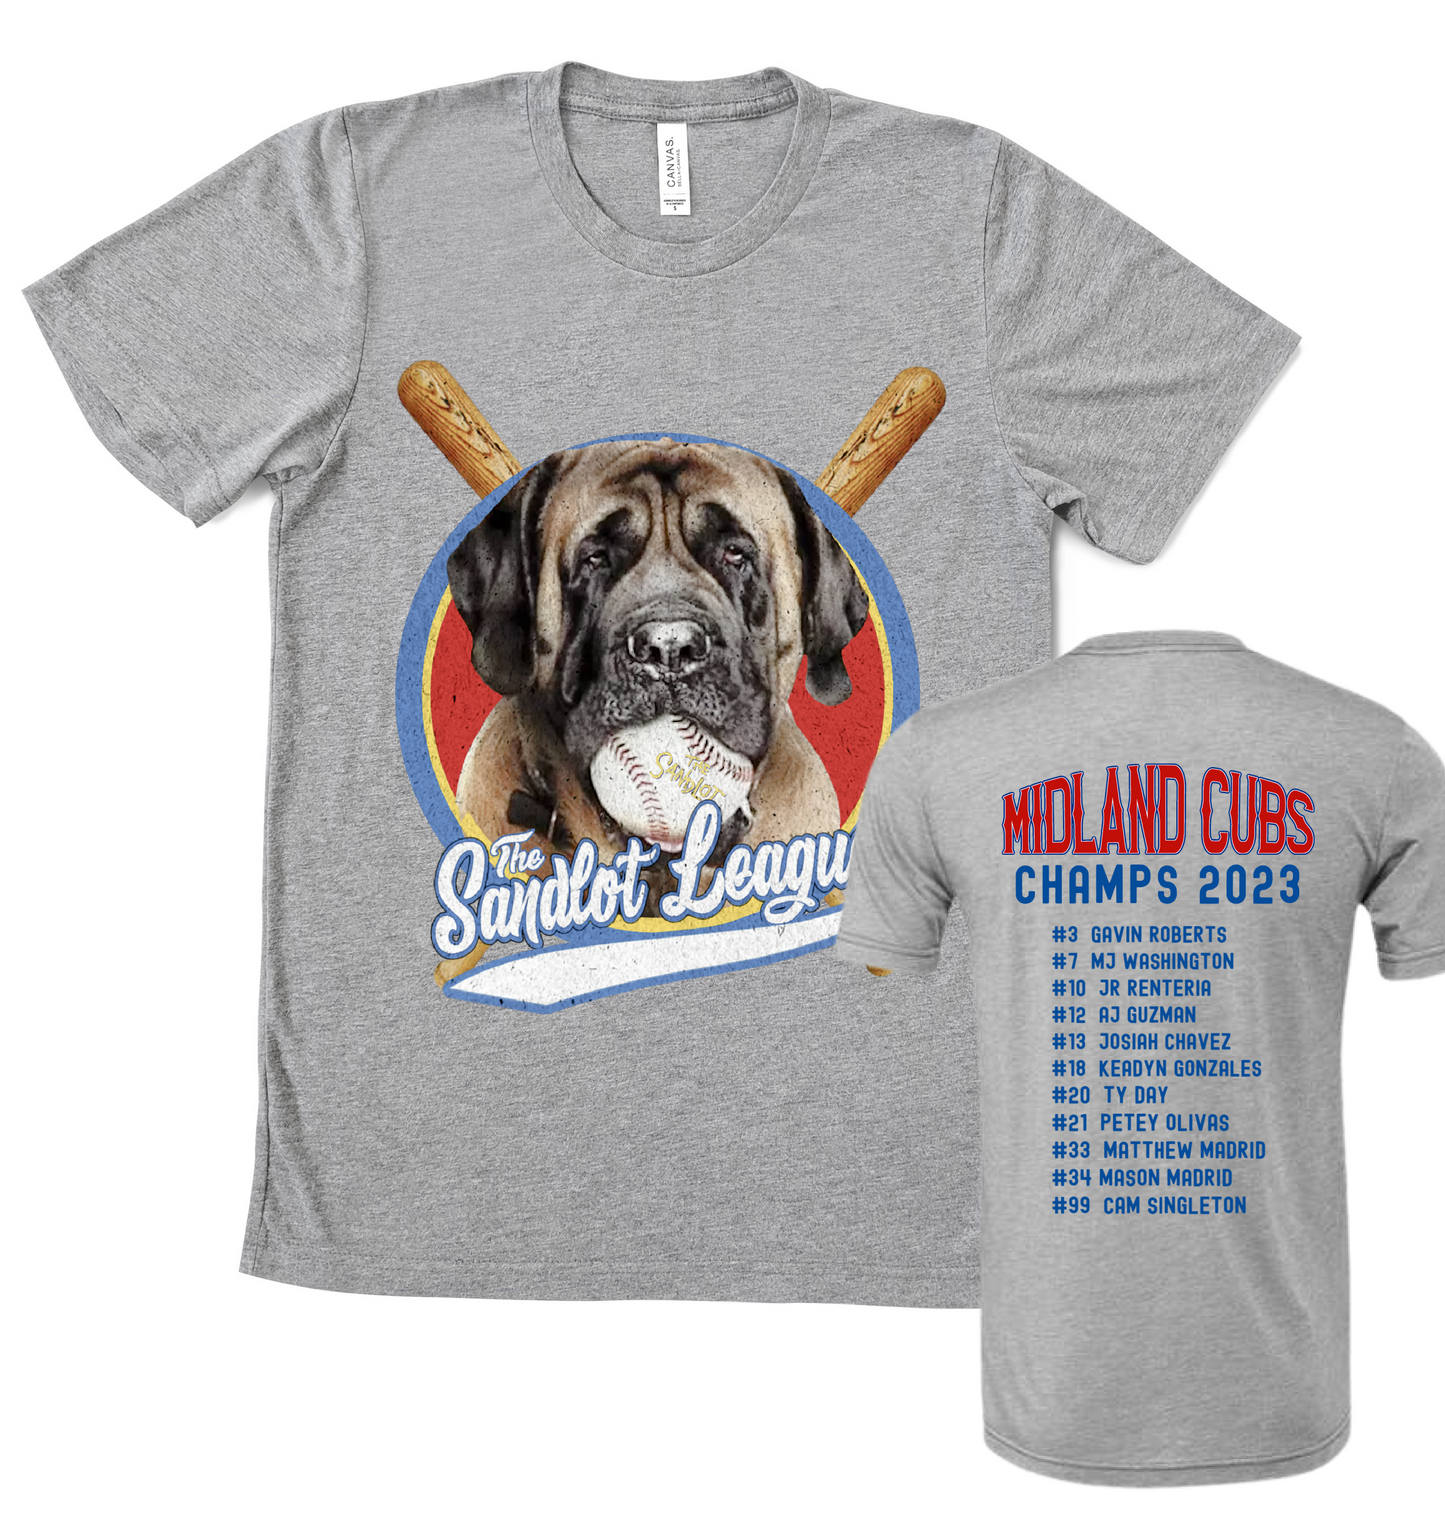 The Sandlot League Championship Shirt/ Front and Back Printing